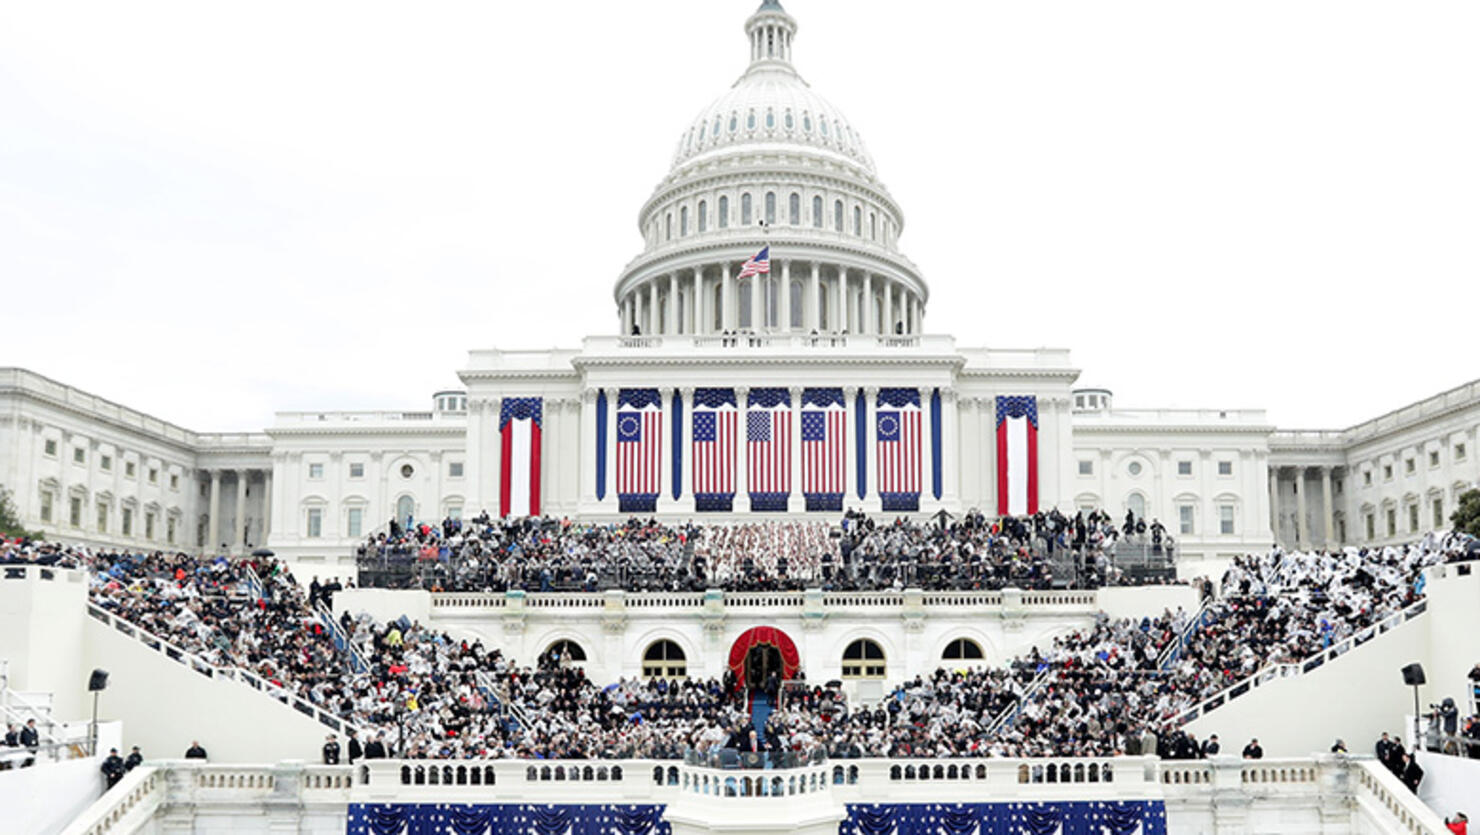 President Donald Trump delivers his inaugural address on the West Front of the U.S. Capitol 